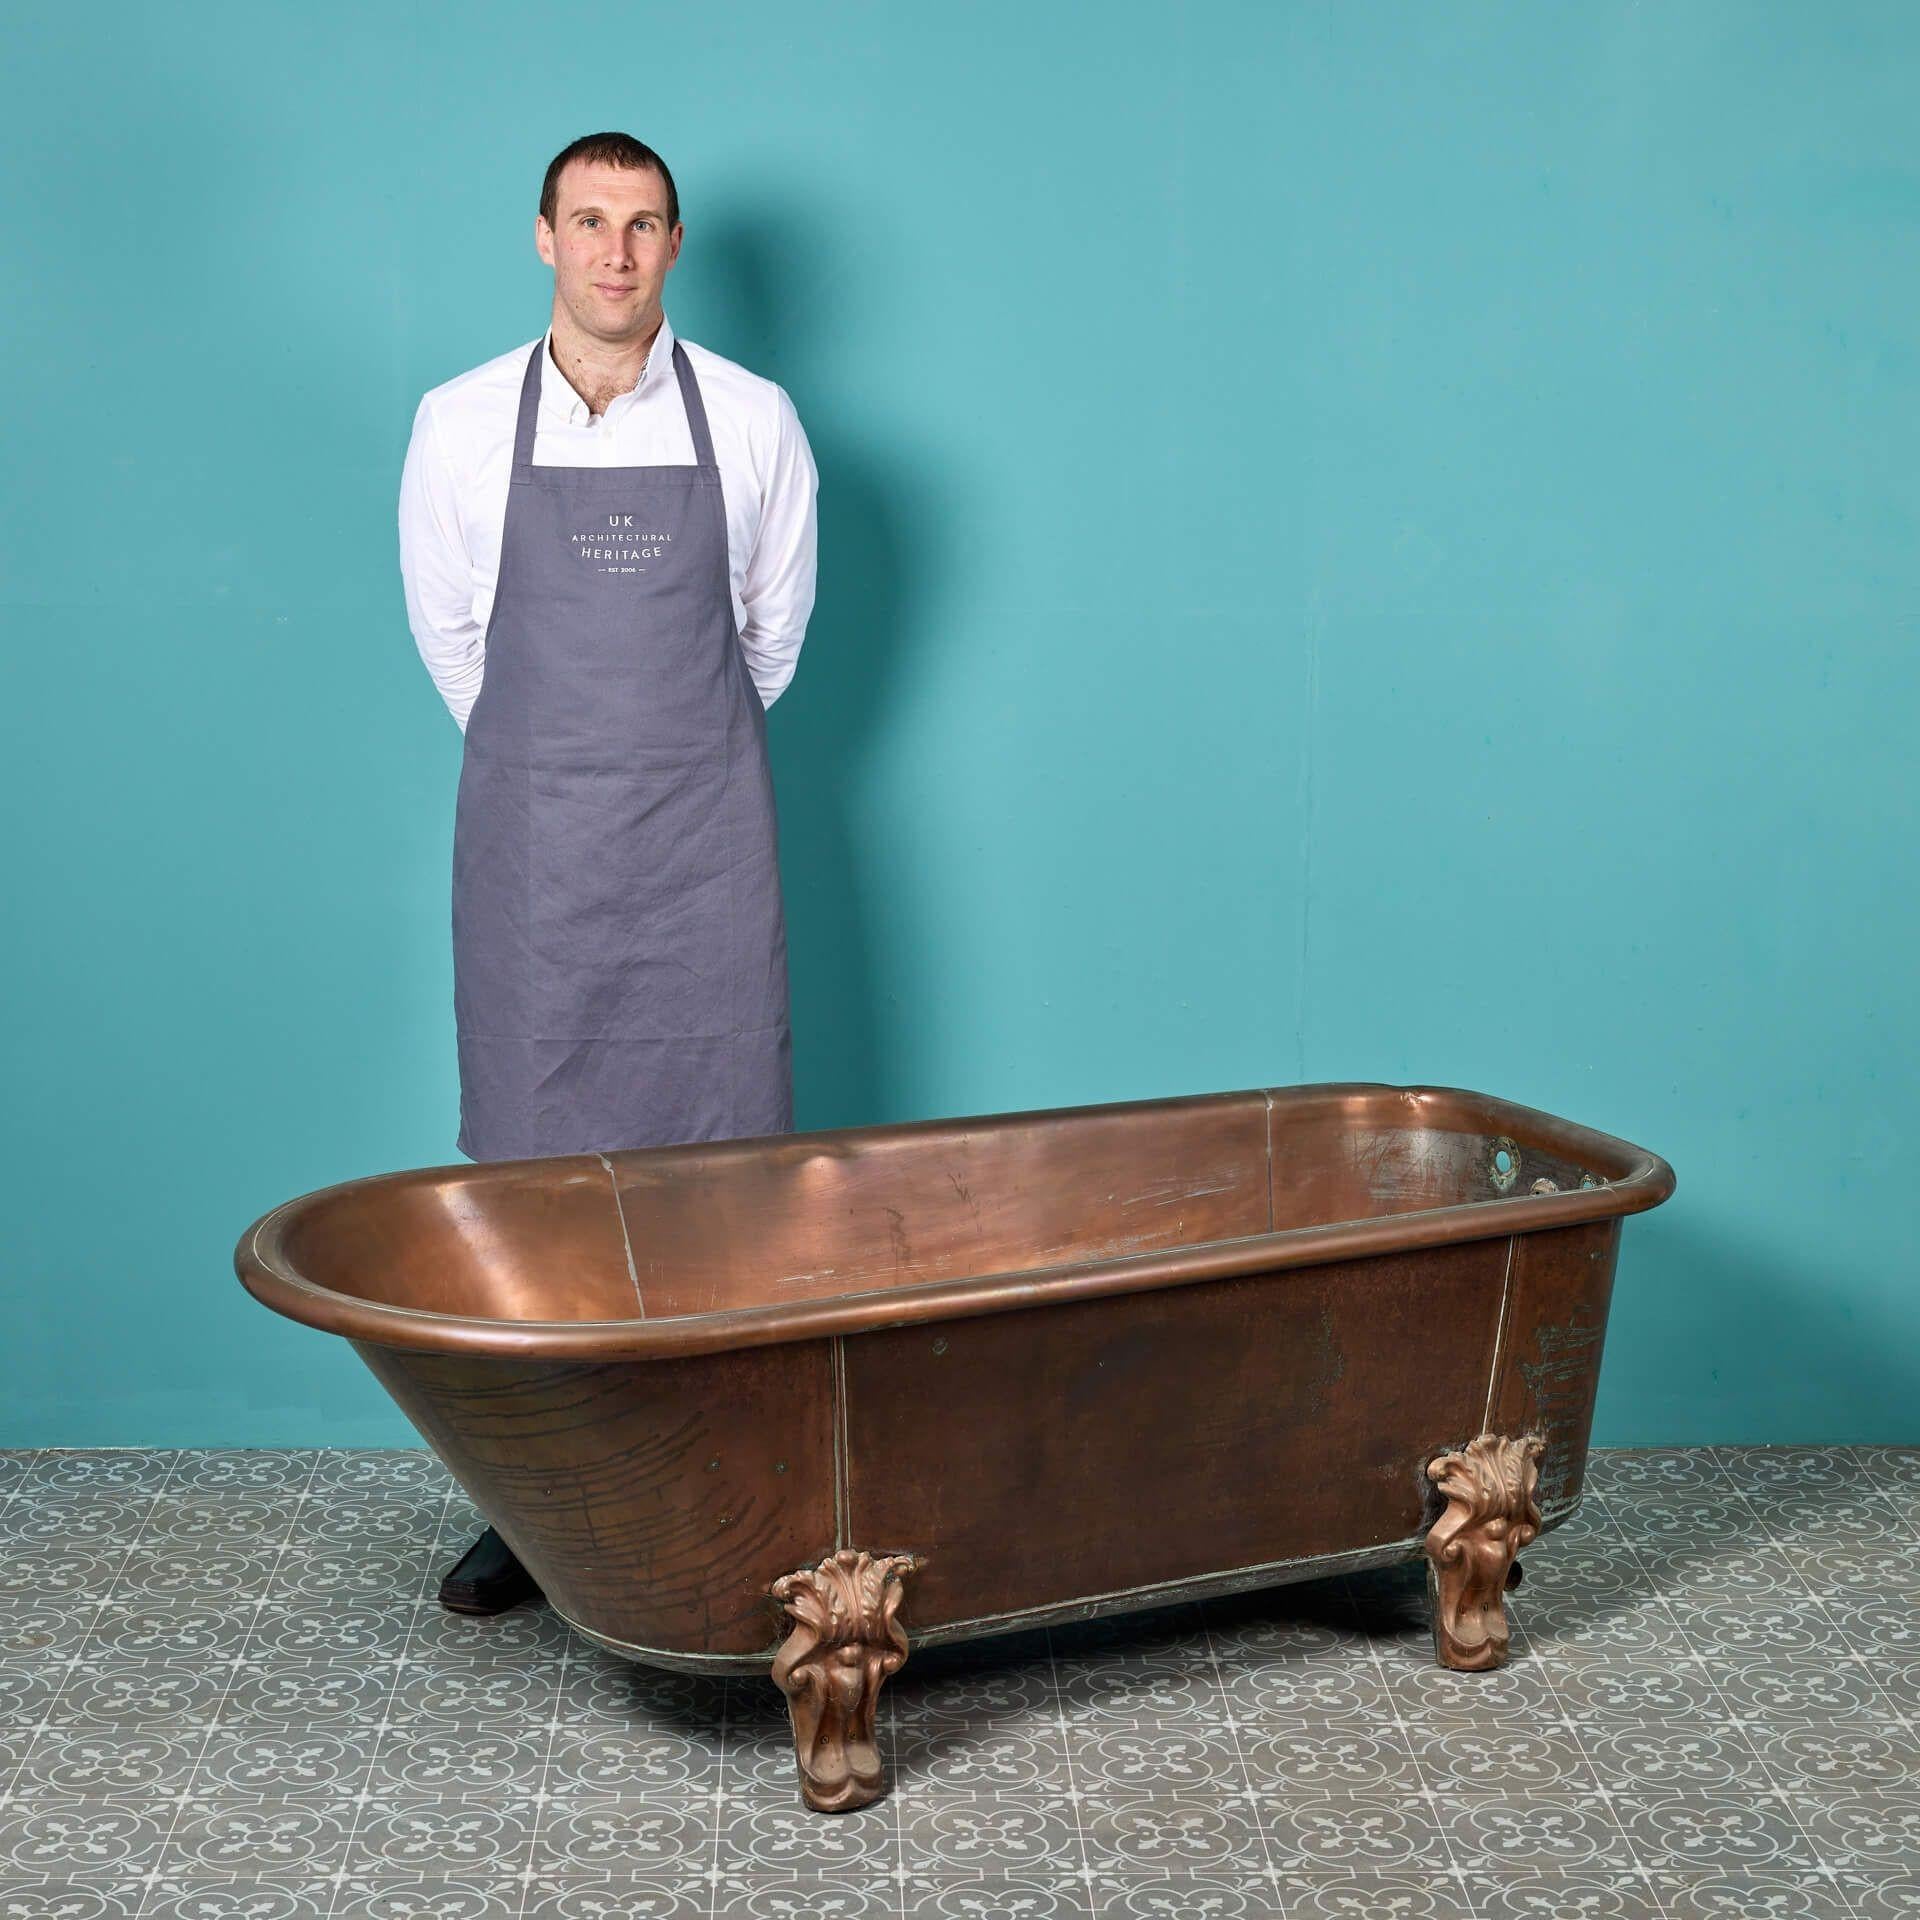 An antique English copper roll top bathtub by Ewart and Son Ltd, circa 1890. A beautiful piece for the vintage bathroom of an Edwardian or Victorian style property, this copper bath features a stylish roll top, decorative leg covers and an